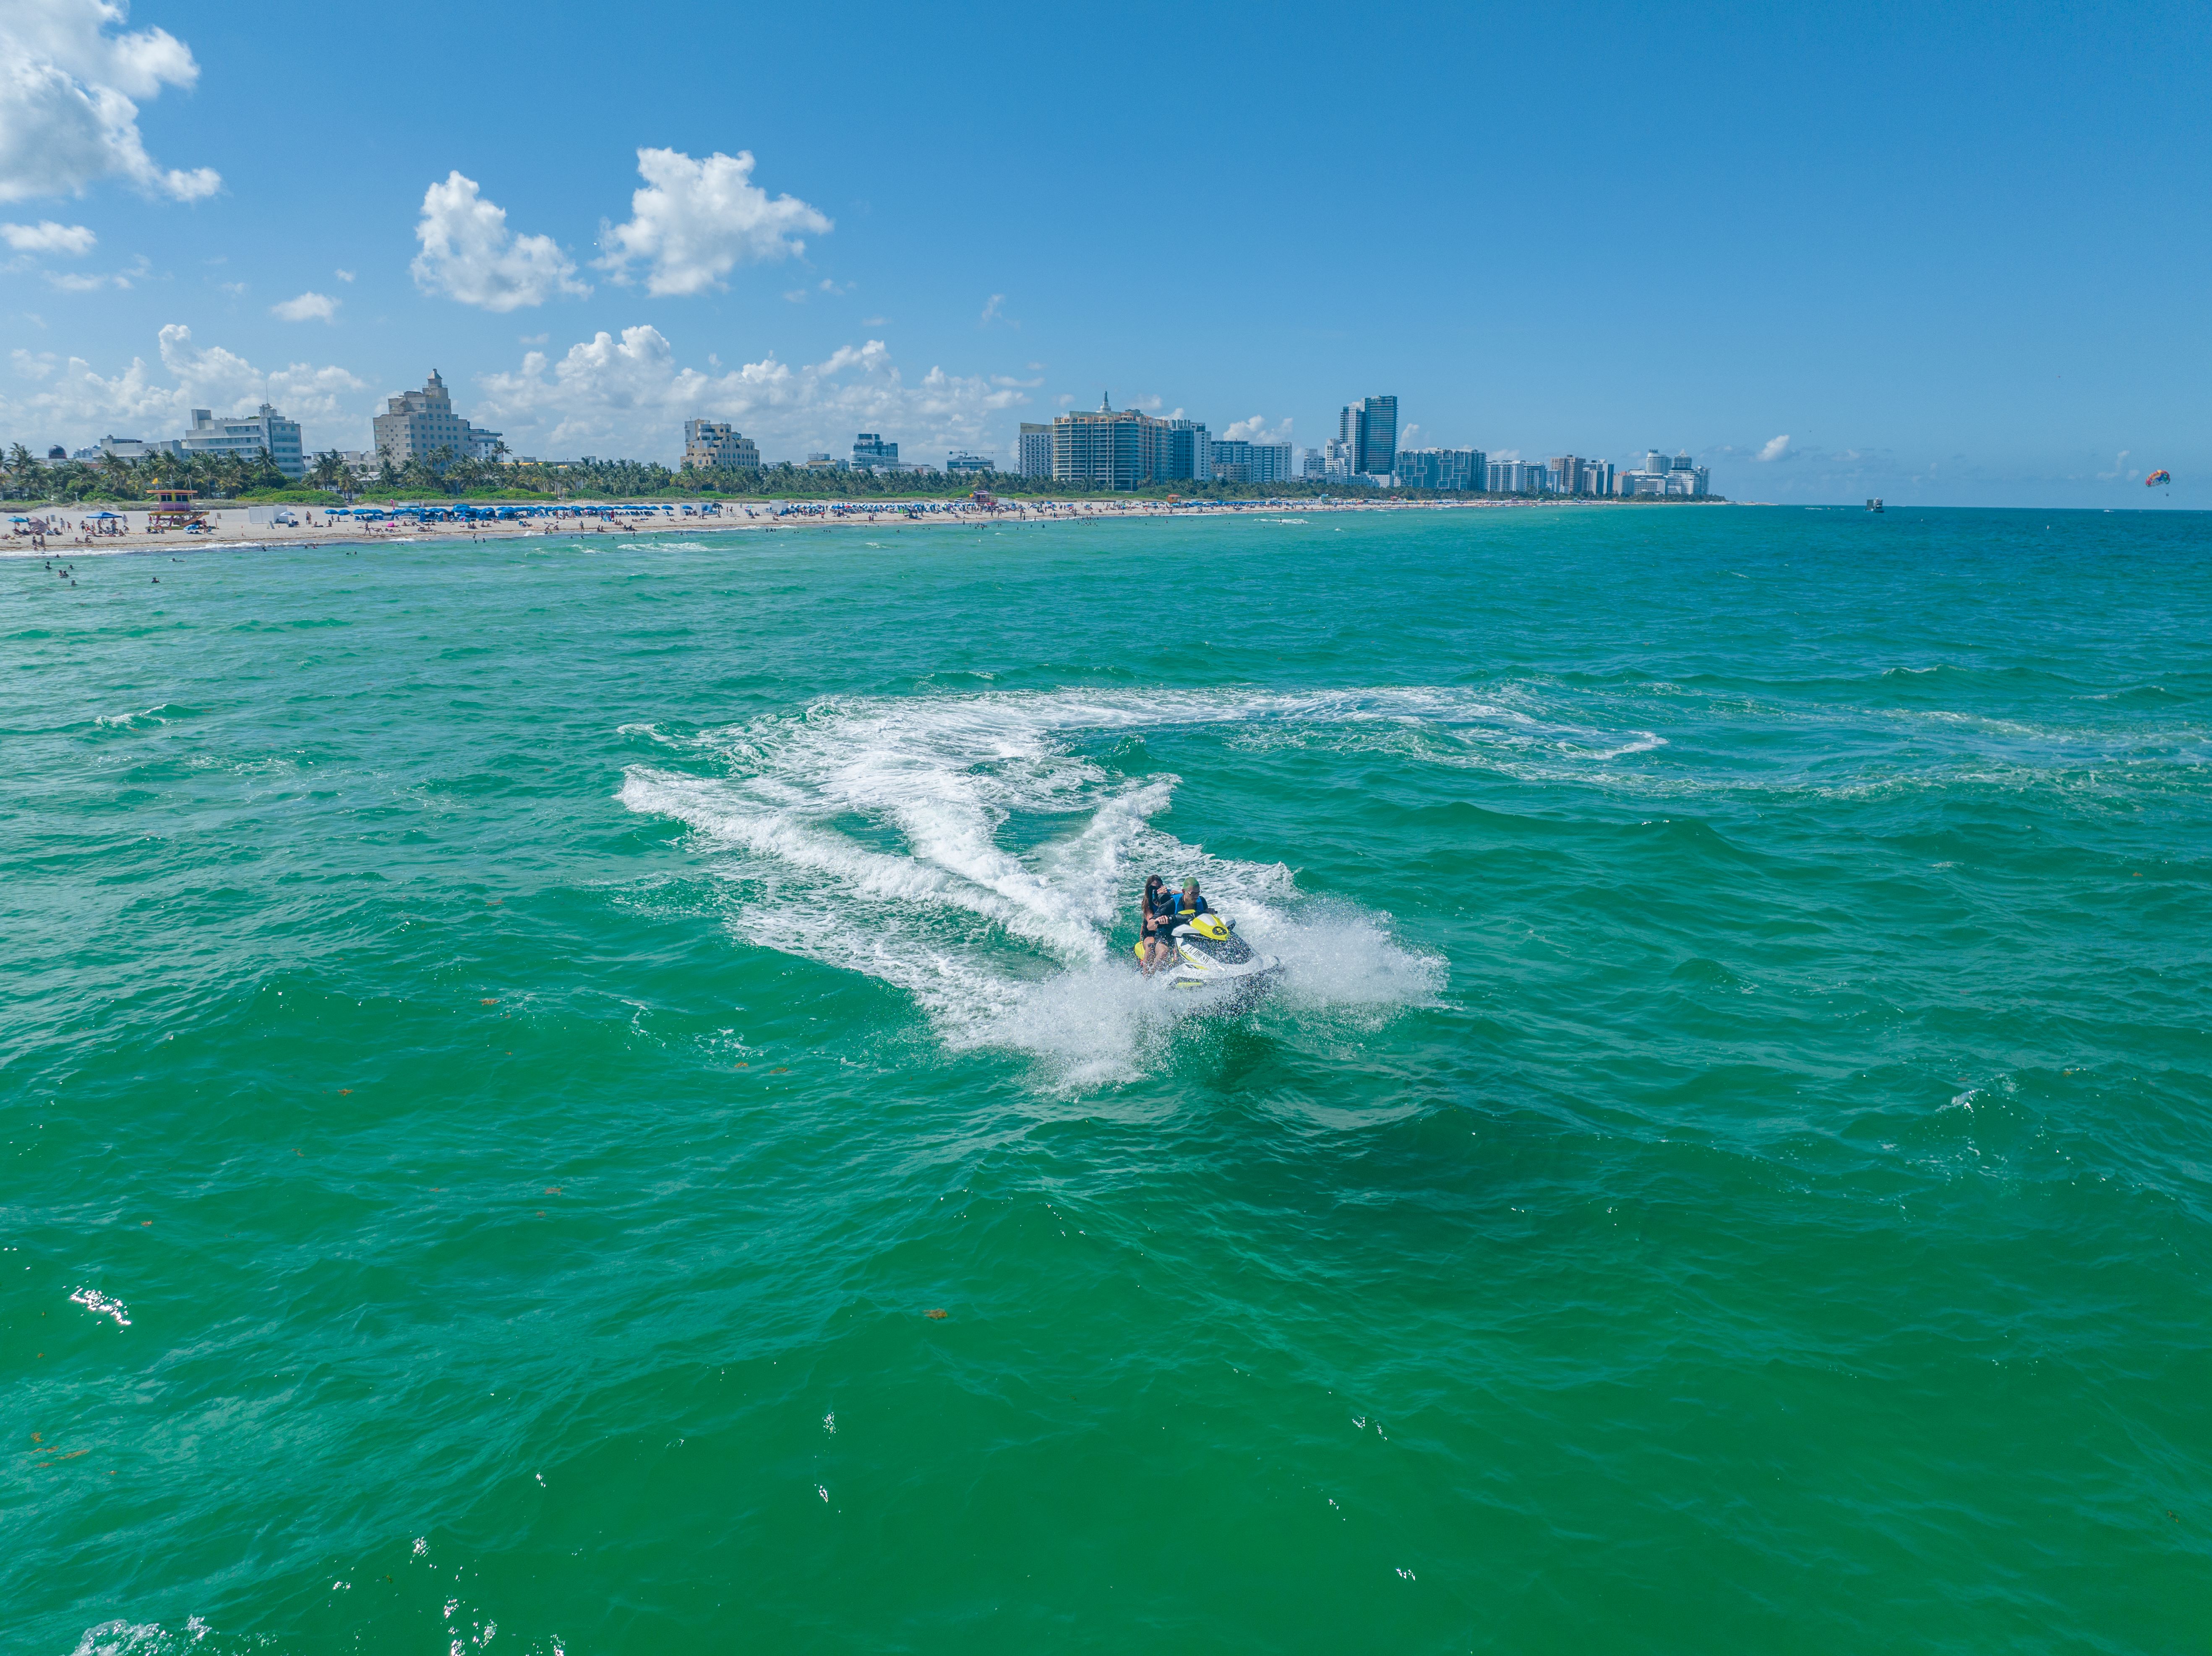 Connect With the Waters Campaign Highlights the Best Experiences on Miami Beach this Season